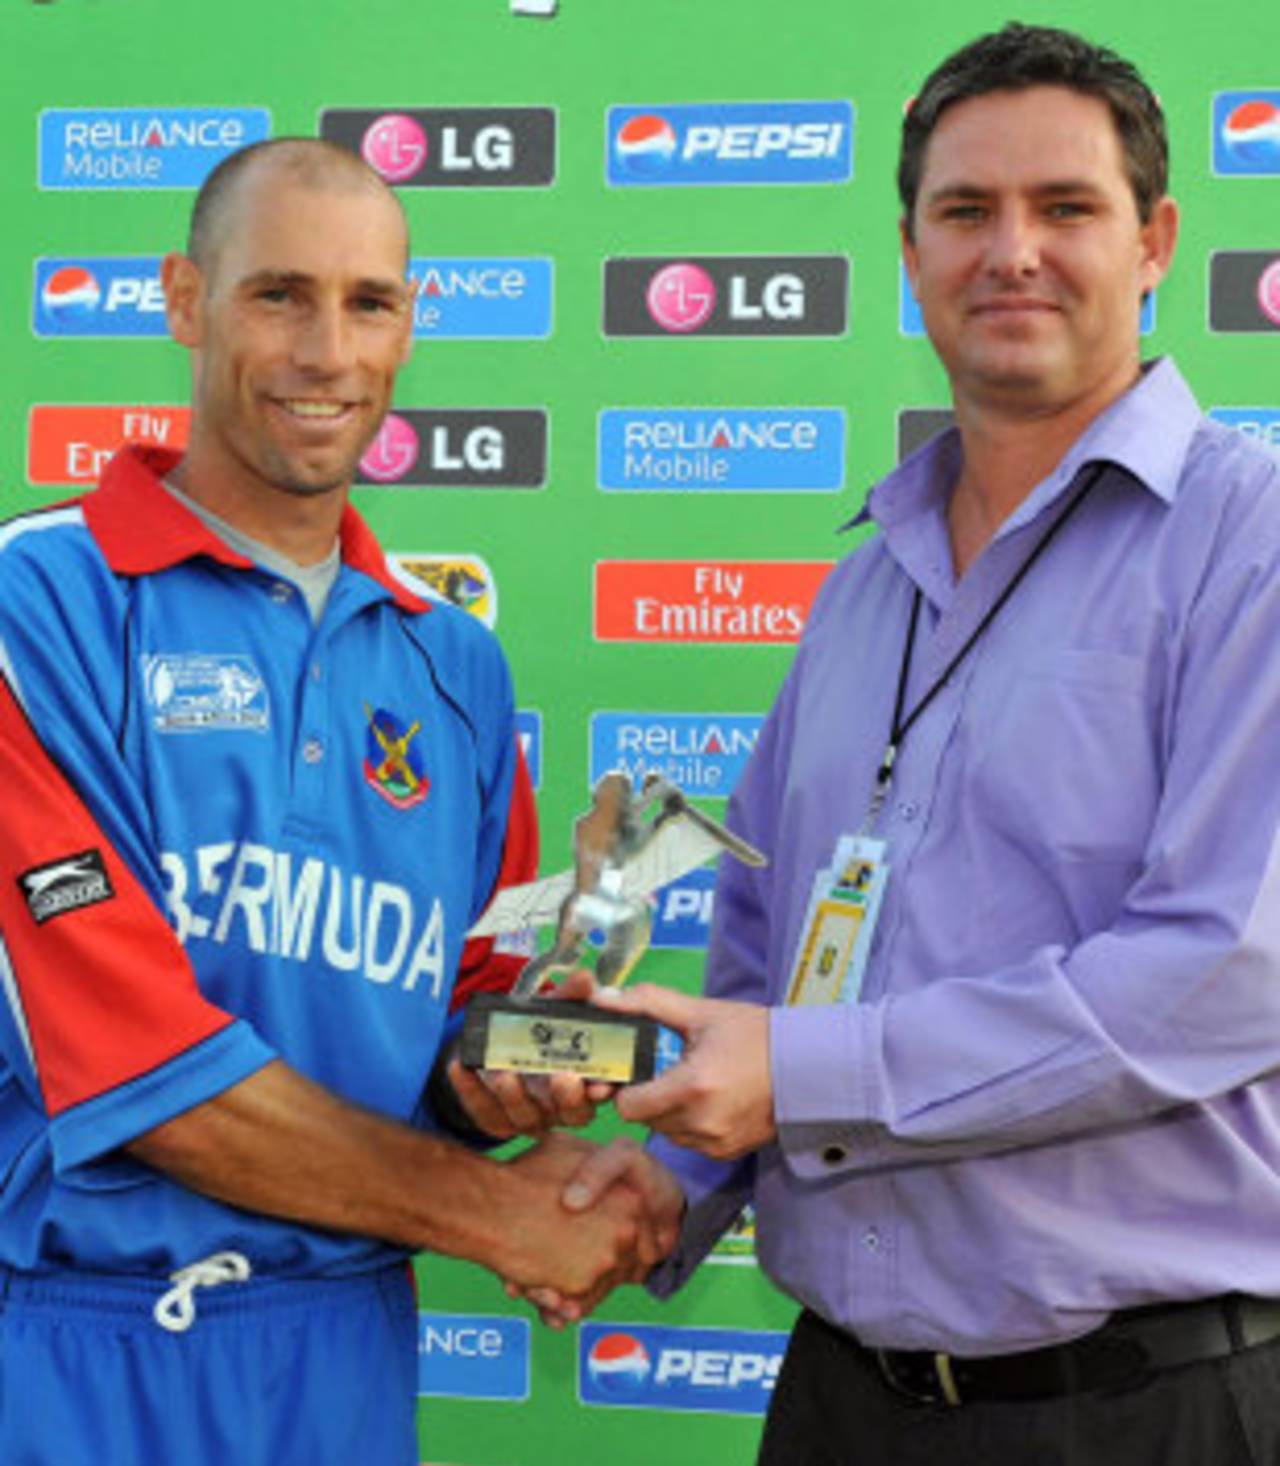 Jacques Faul, seen here with Bermuda's David Hemp in 2009, has made progress with CSA during his tenure&nbsp;&nbsp;&bull;&nbsp;&nbsp;Getty Images